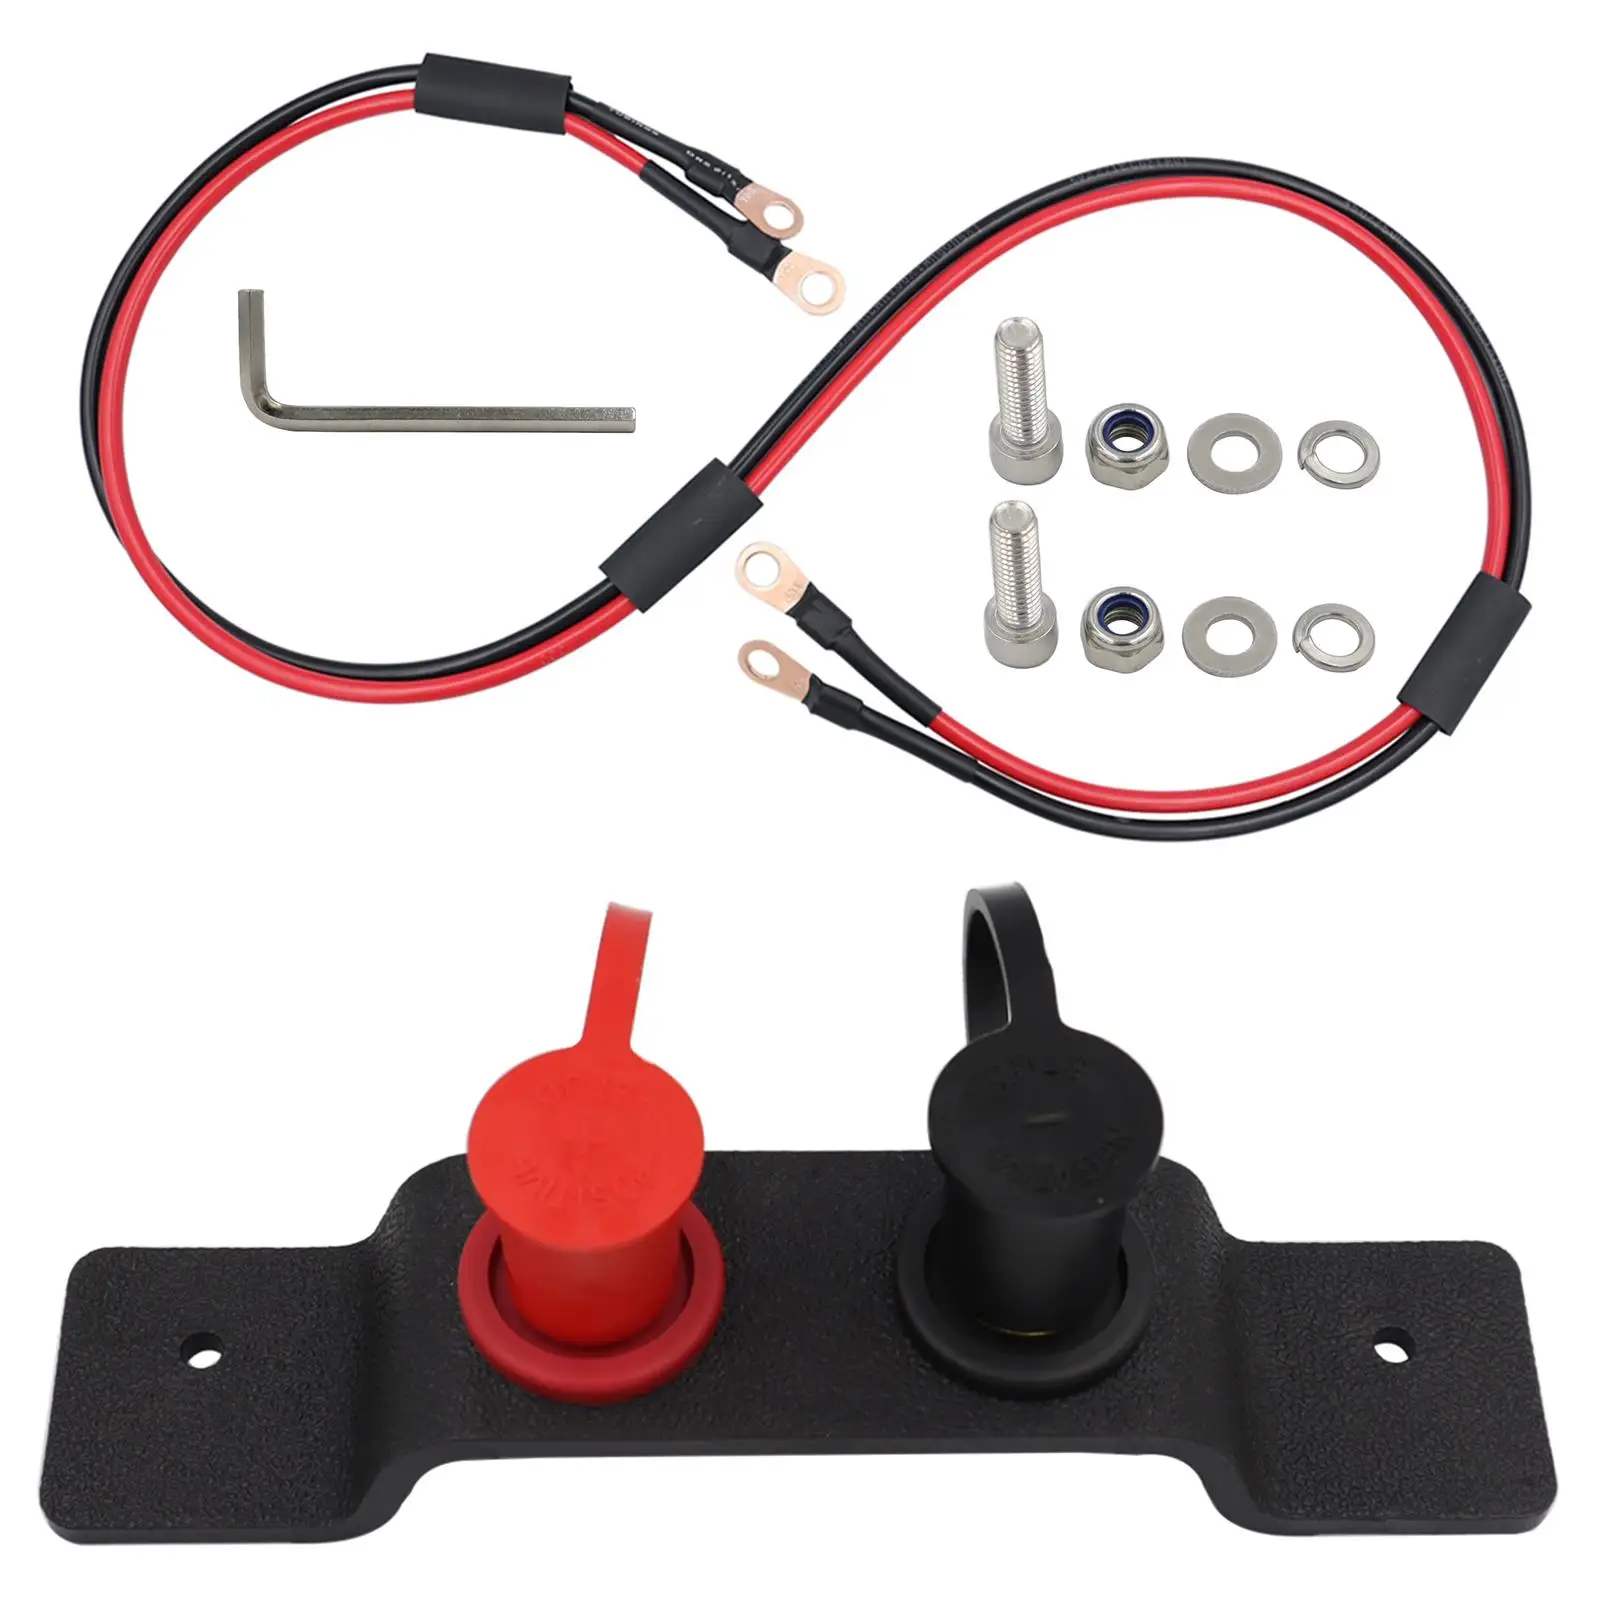 Battery Jump Post Starter Battery Terminals Relocation, for Lawn Mowers Trucks